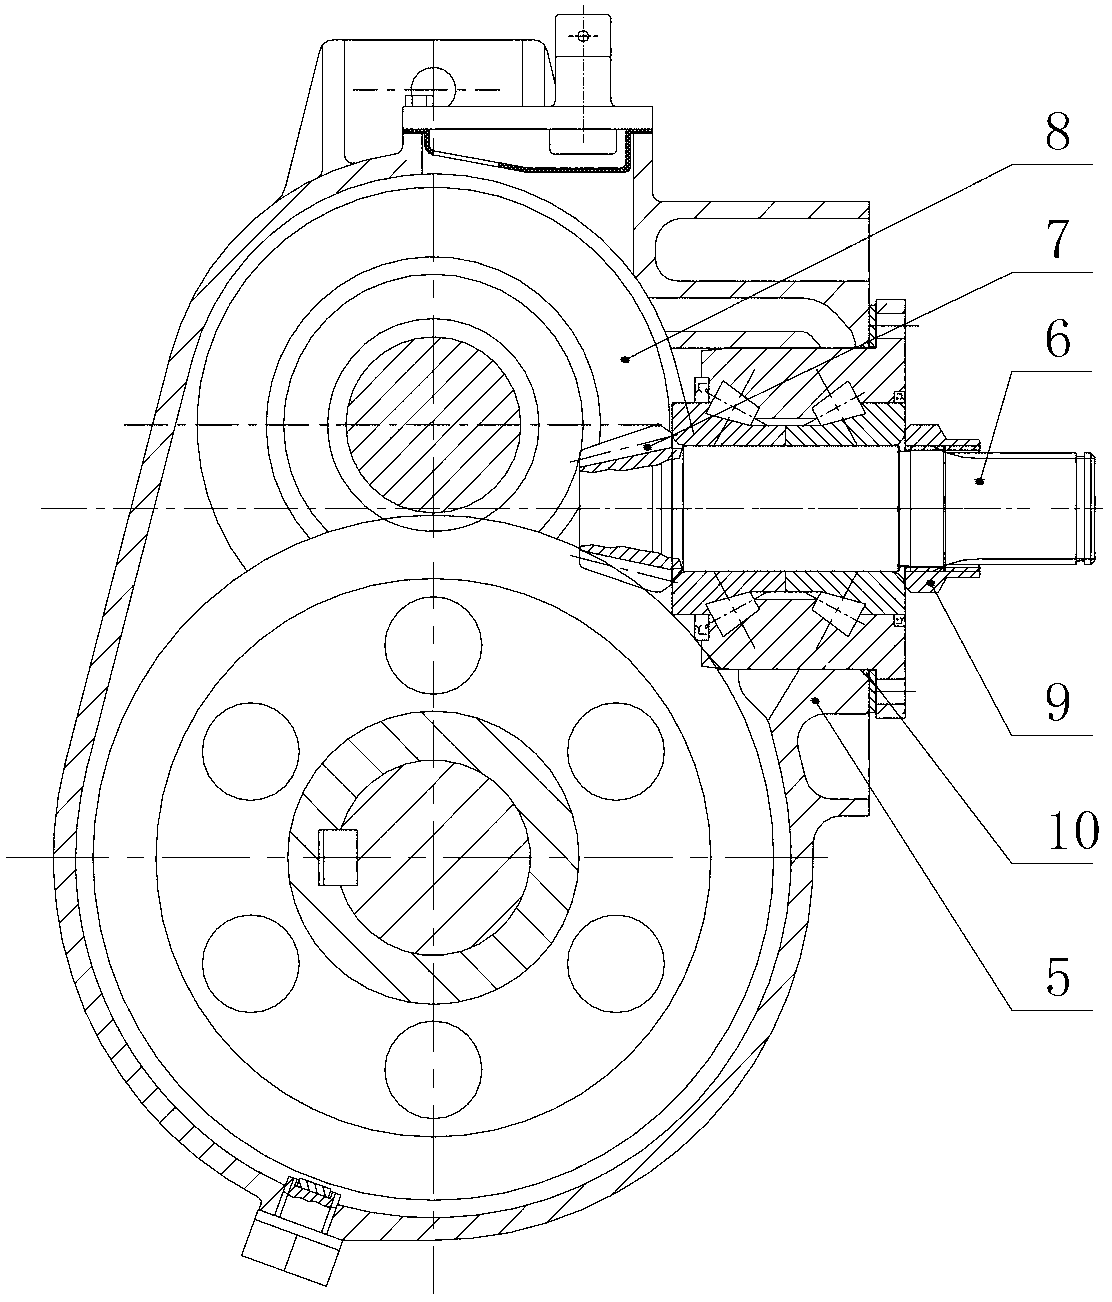 Bearing unit for supporting transmission shaft and gear reducer